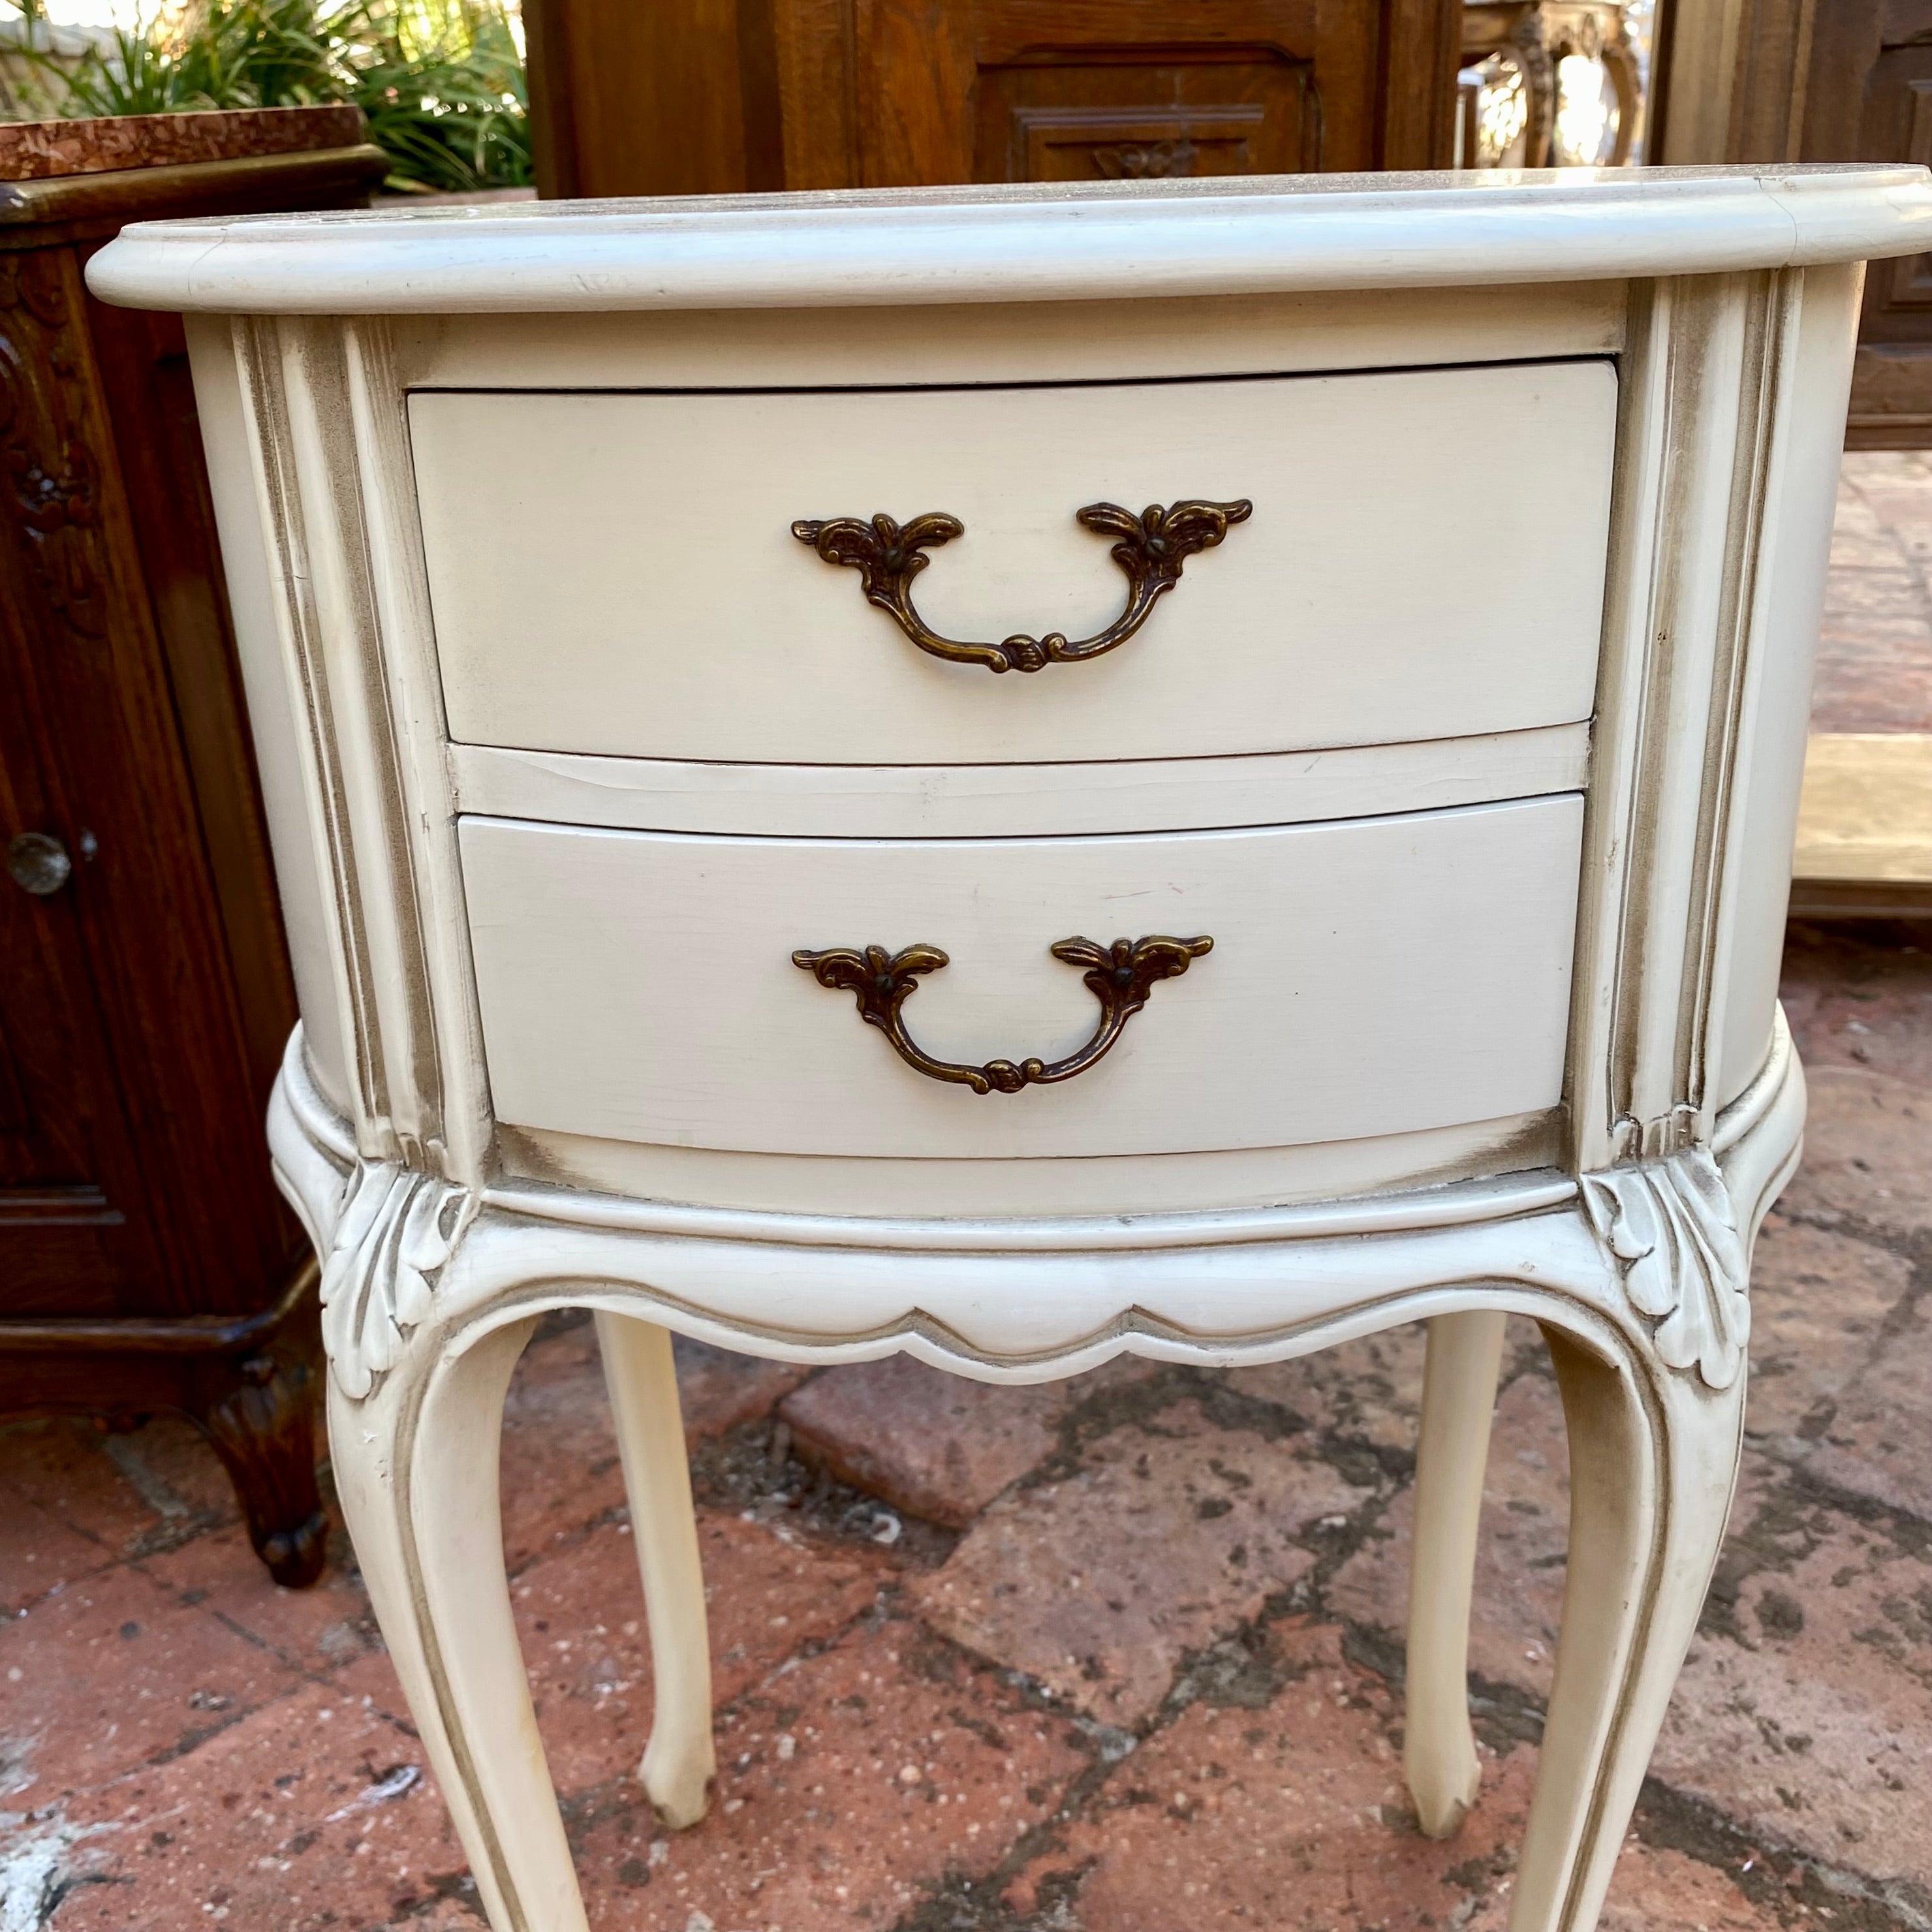 Dainty Pair of French Style Pedestals